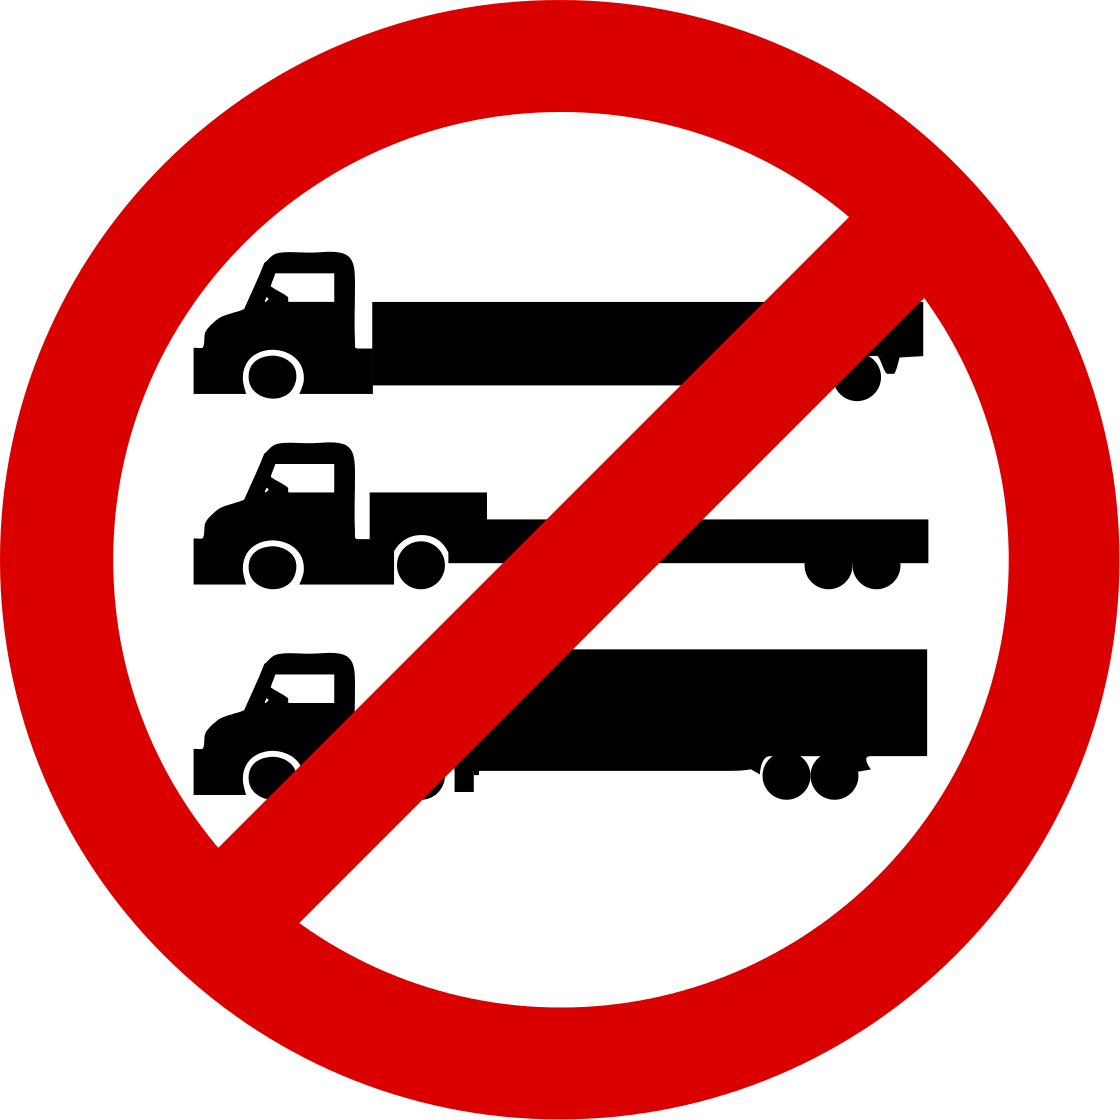 No vehicles with 3 axles or more